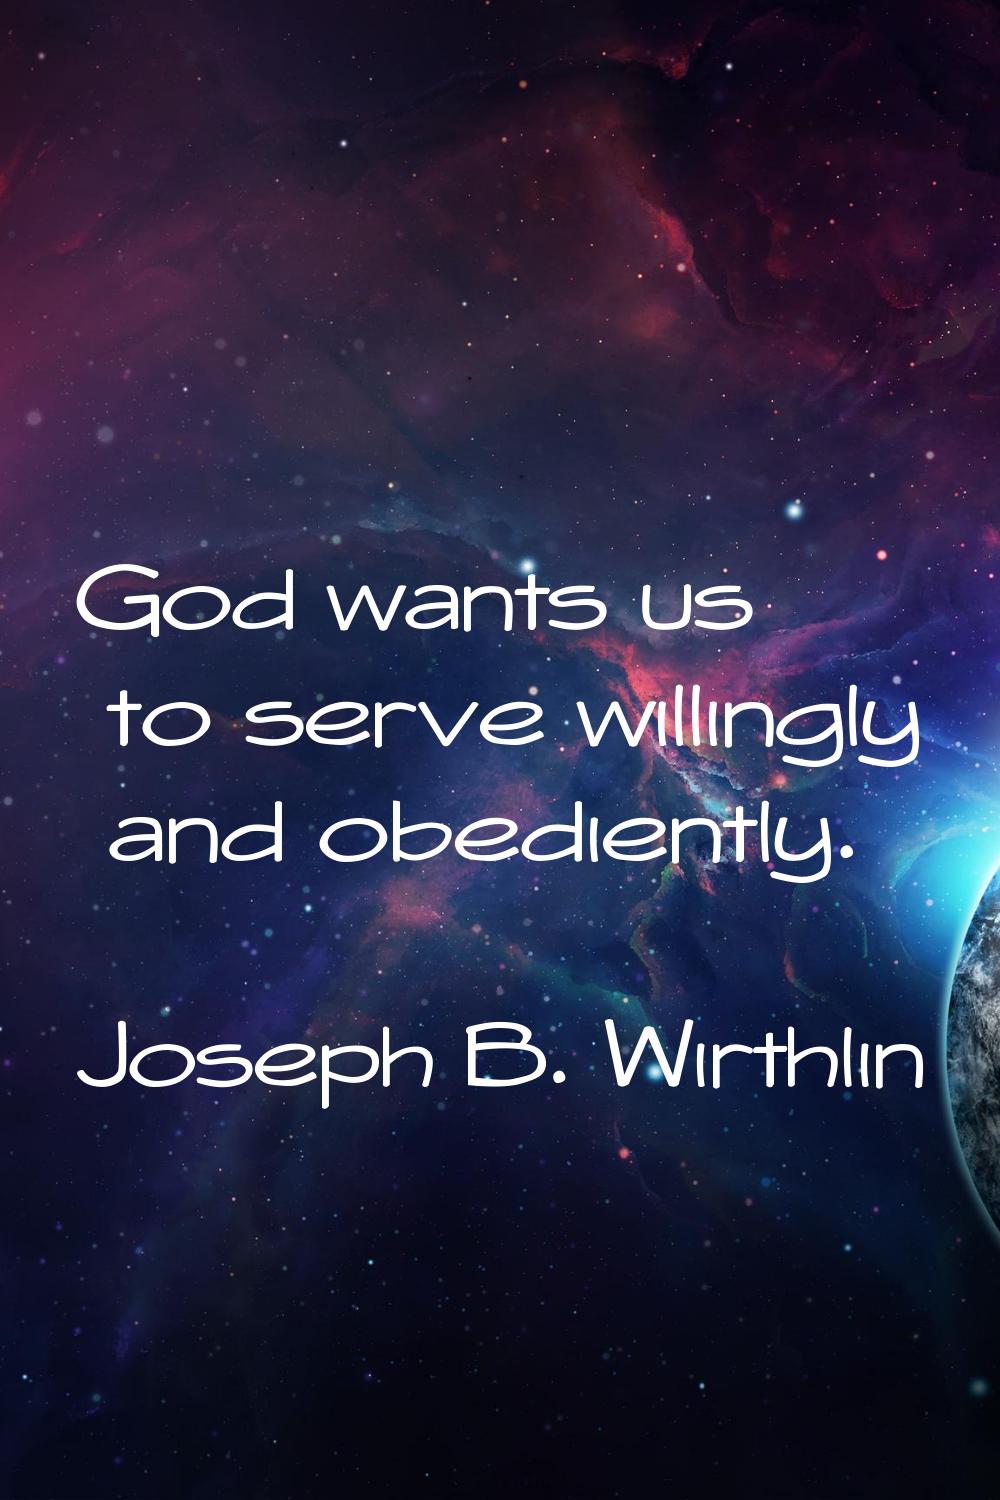 God wants us to serve willingly and obediently.